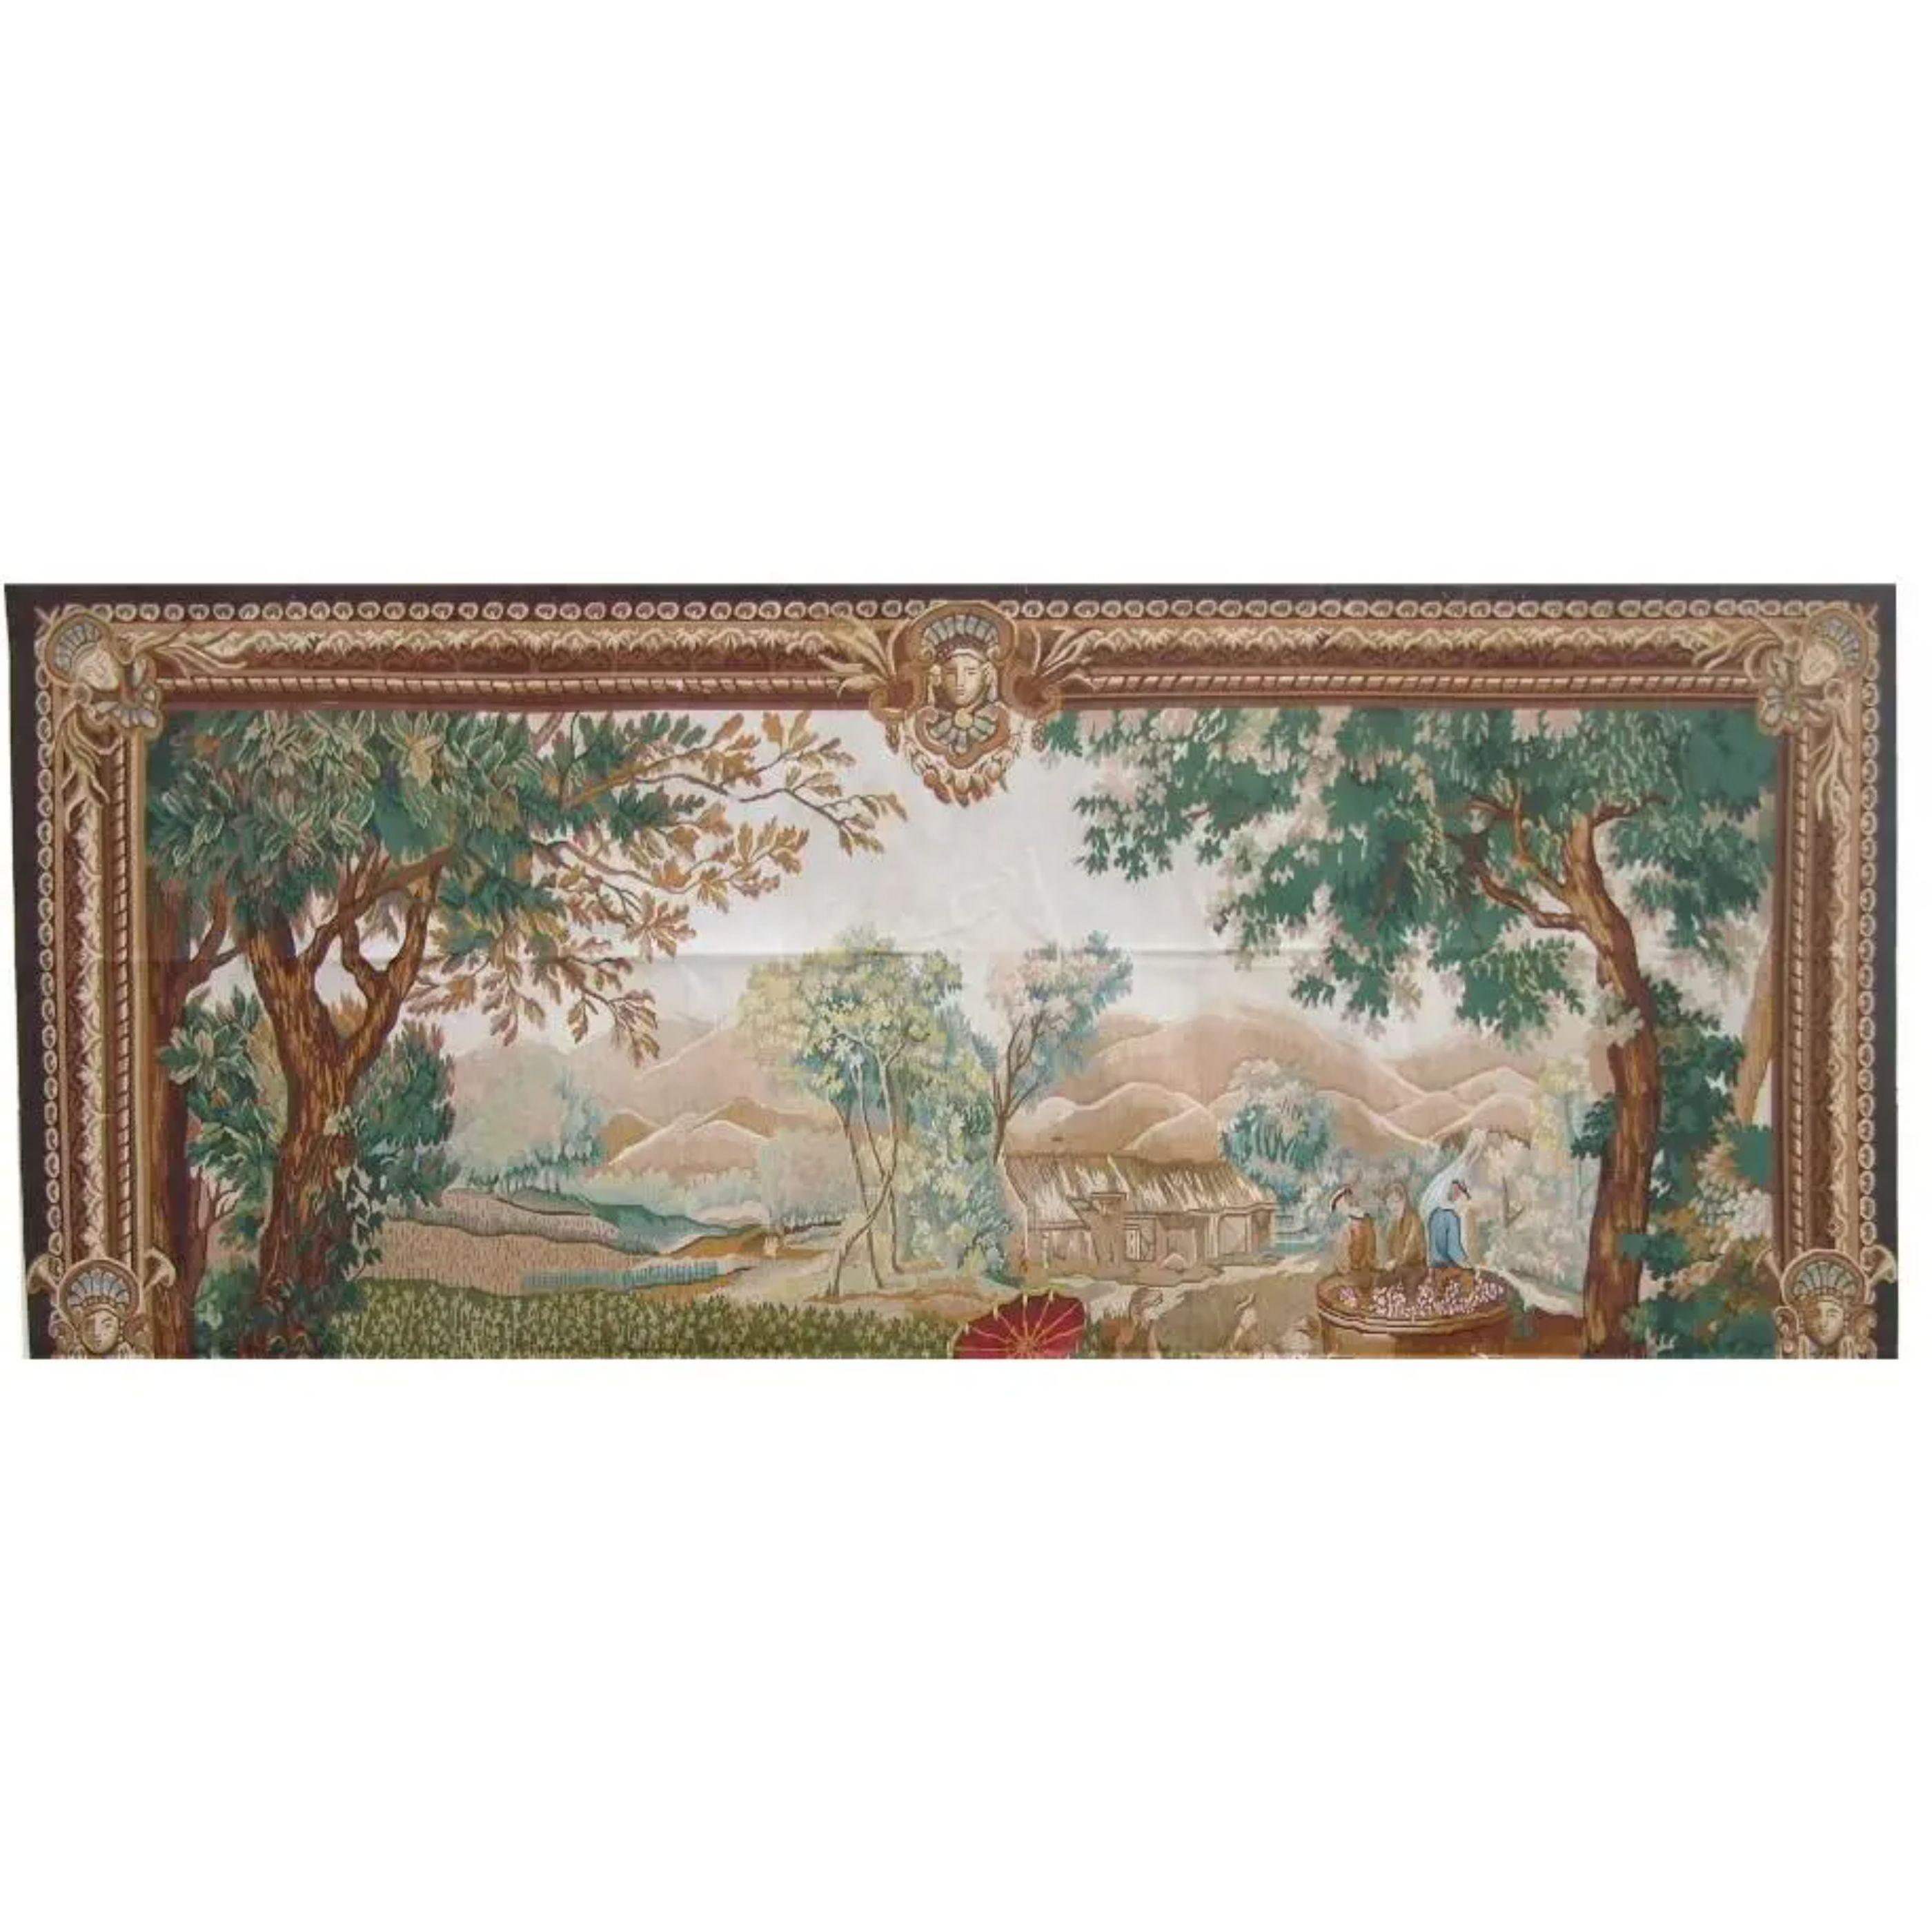 Unknown Vintage Tapestry Depicting Royalty 8X6.5 For Sale